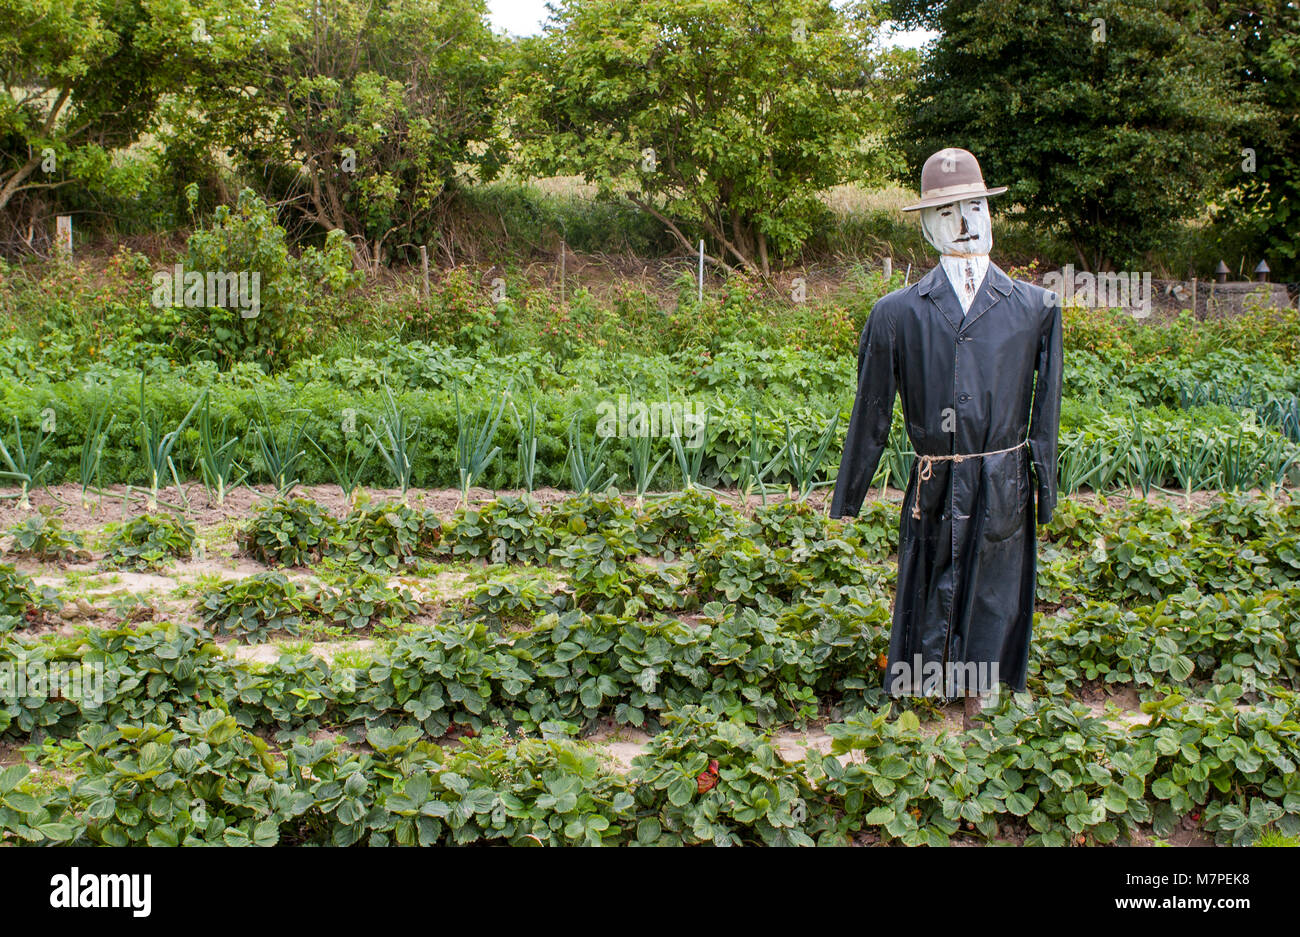 Scarecrow protects the cultivator's cultivation, Denmark. Stock Photo